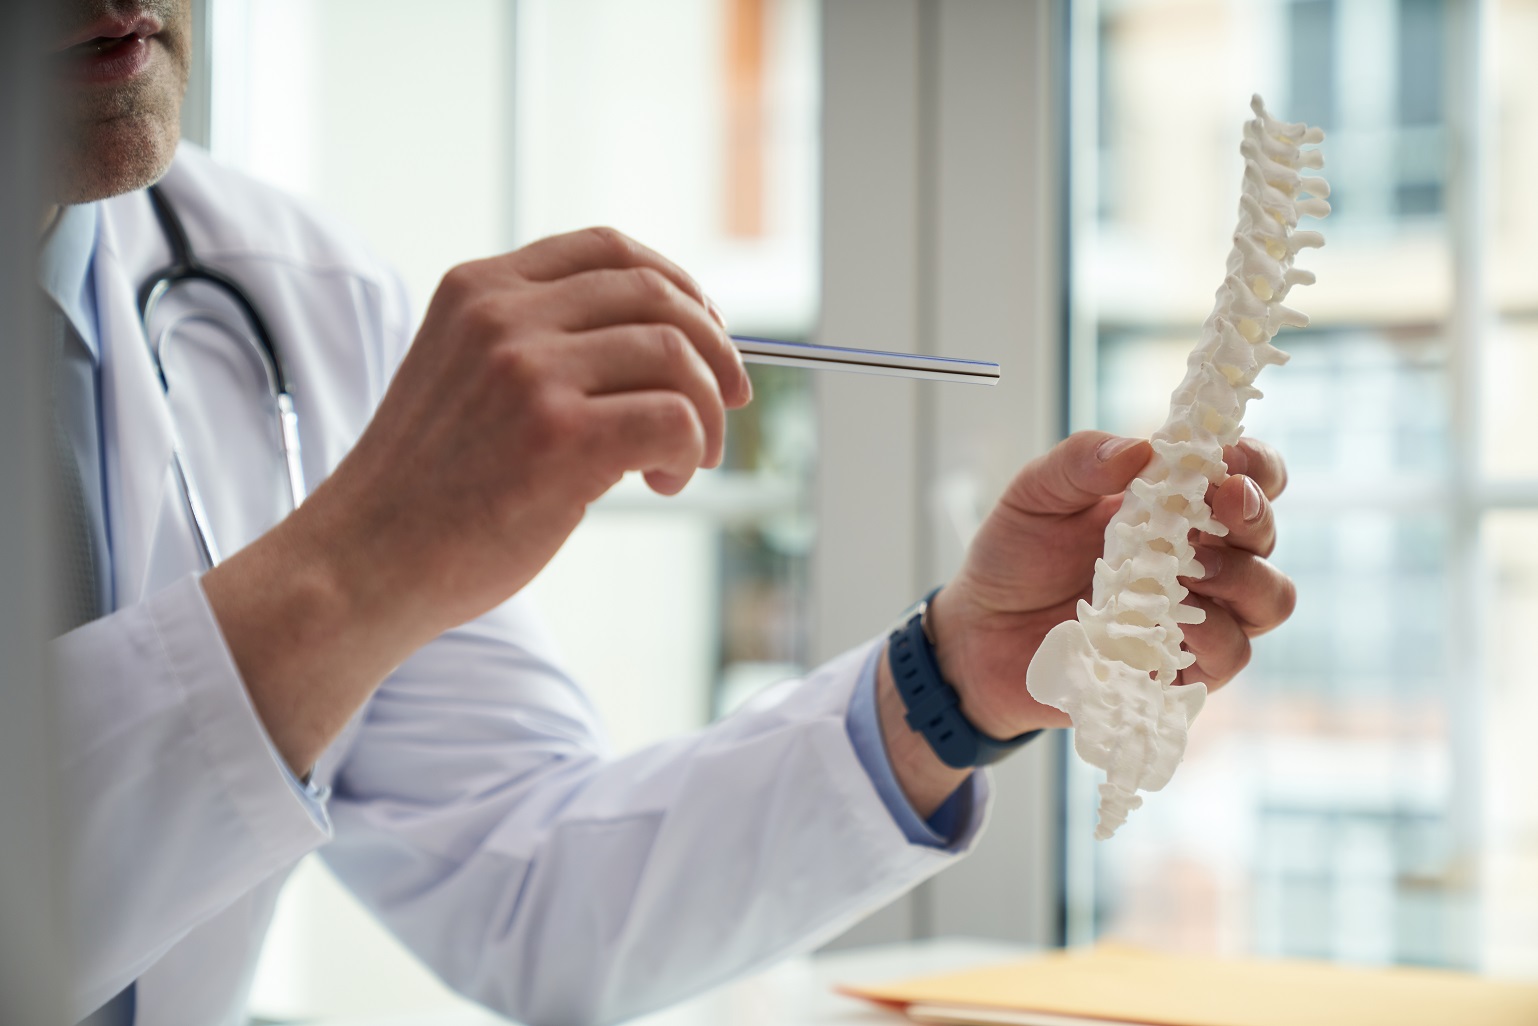 Physician holding a model of the spine